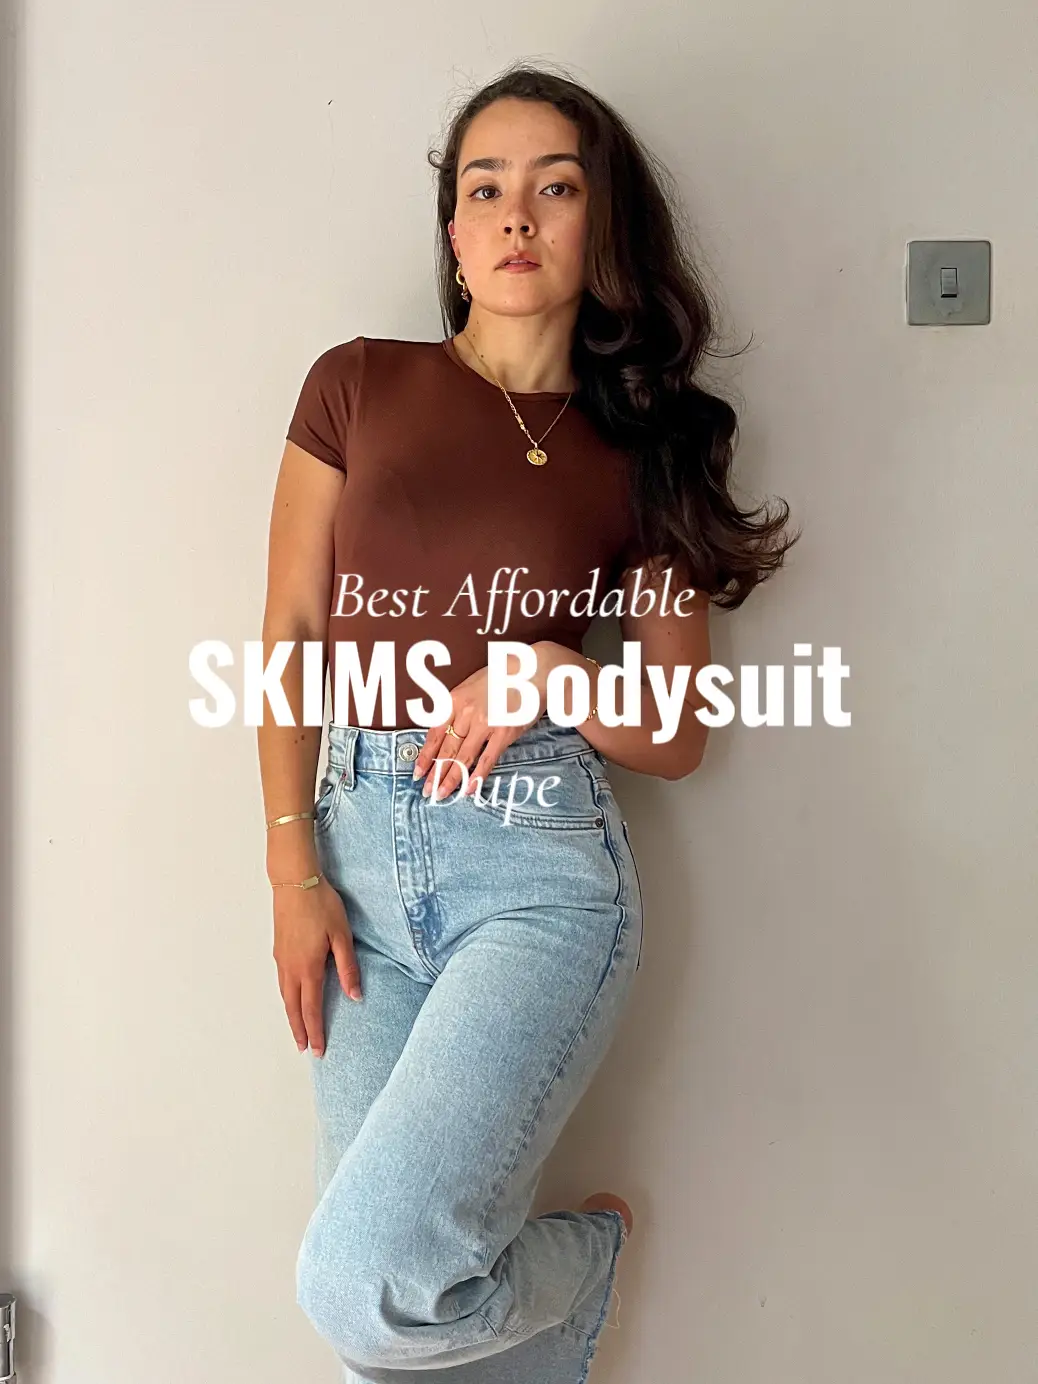 I bought a £46 Kim Kardashian Skims top and a cheap dupe from